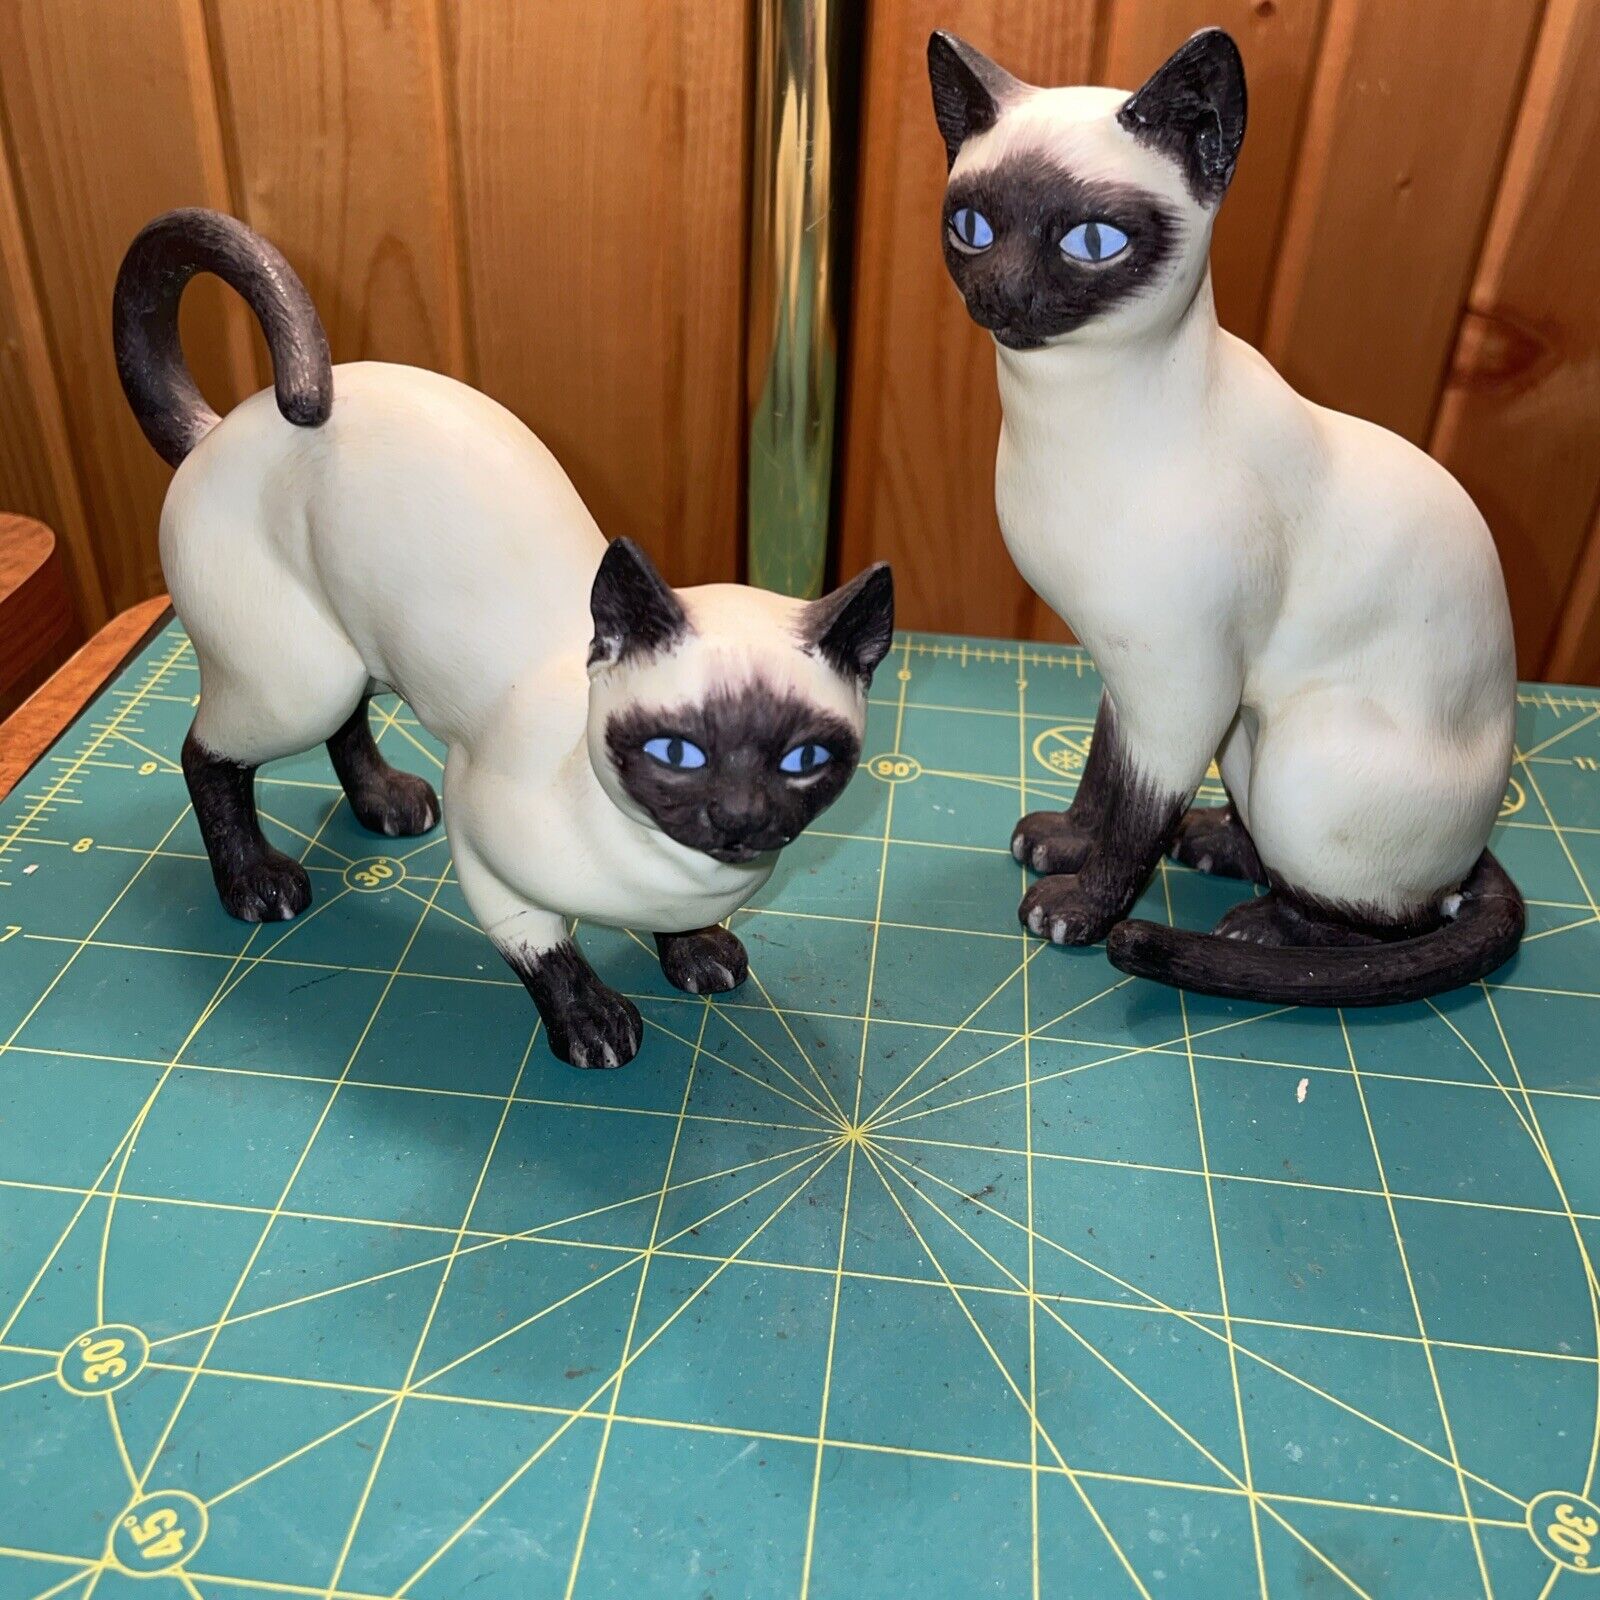 2  COLLECTIBLE VINTAGE Andrea by Sadek Bisque Ceramic Siamese Cat Figurines 8290